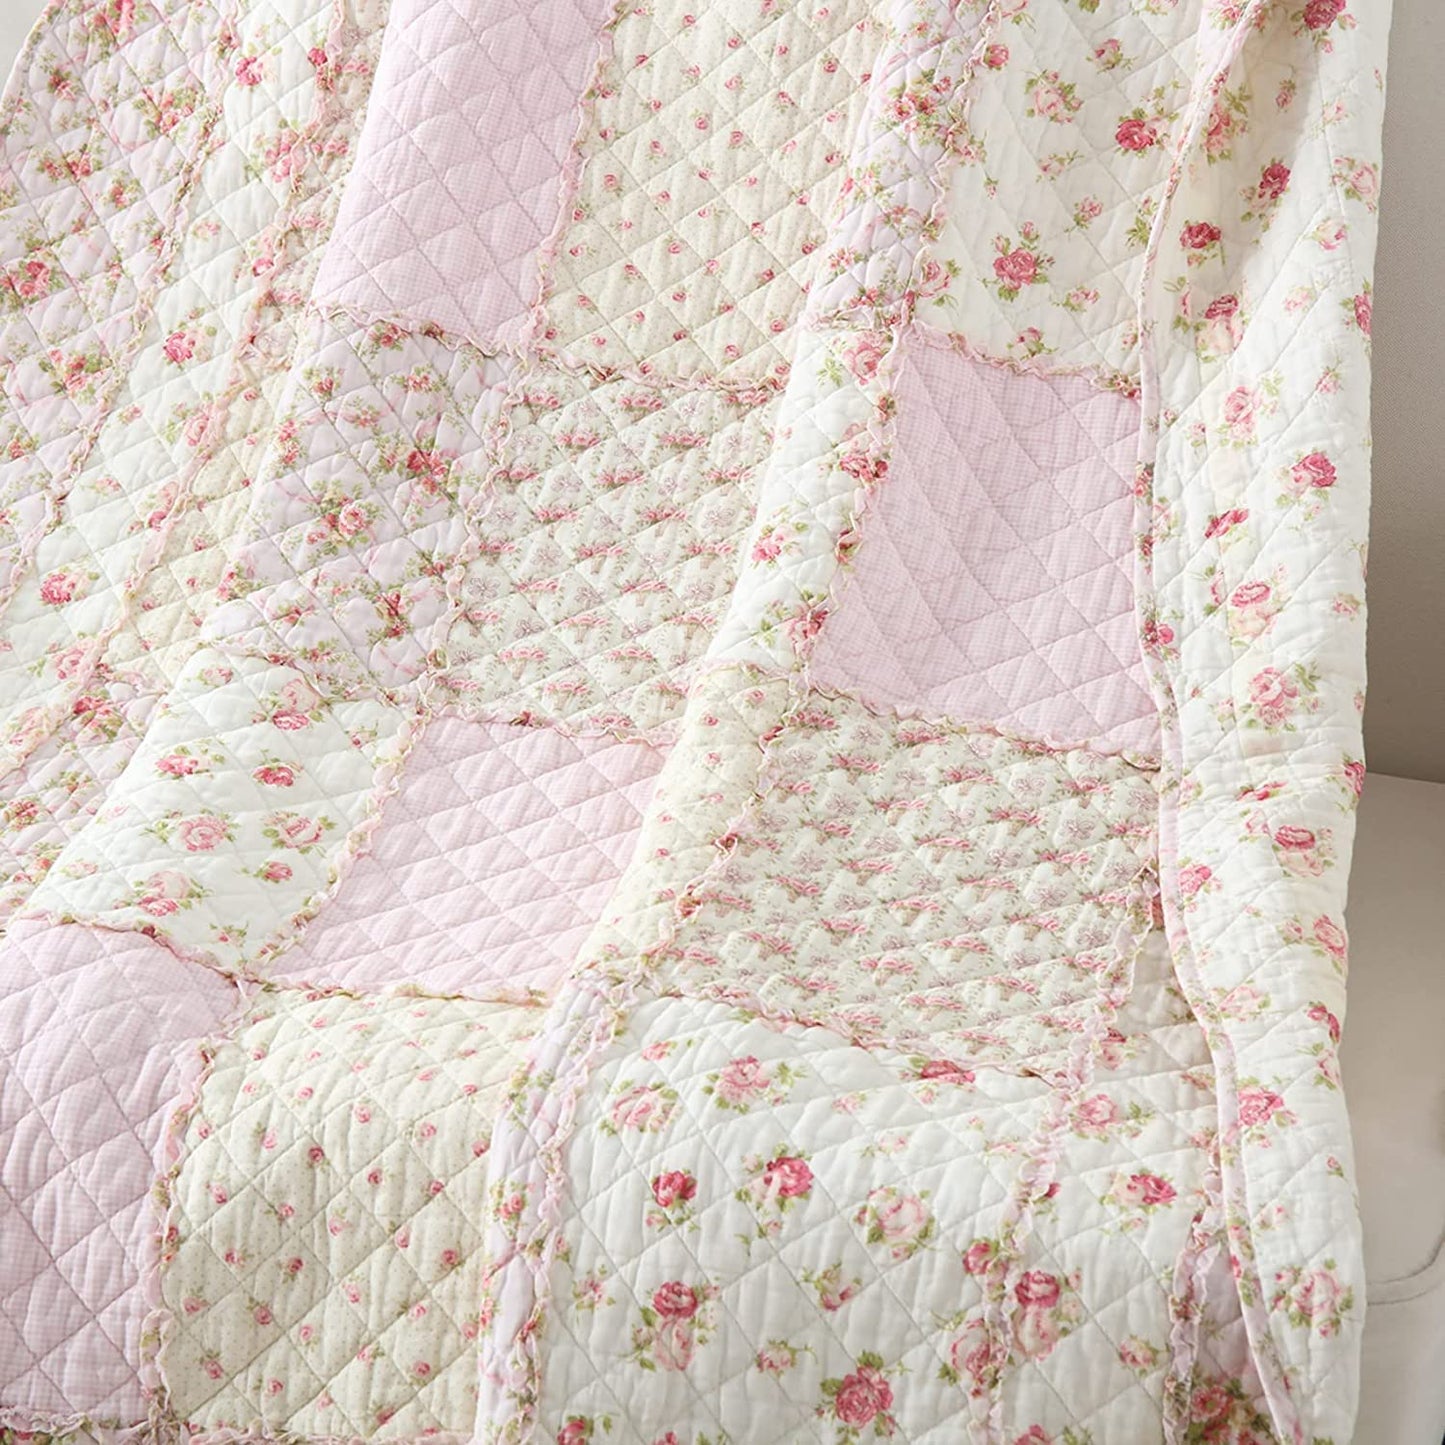  Reaowazo Qucover Pink Floral Quilted Blanket 100% Cotton Floral  Patchwork Quilts Single Bedspread Throw for Couch Beds 59x79 Inch : Home &  Kitchen